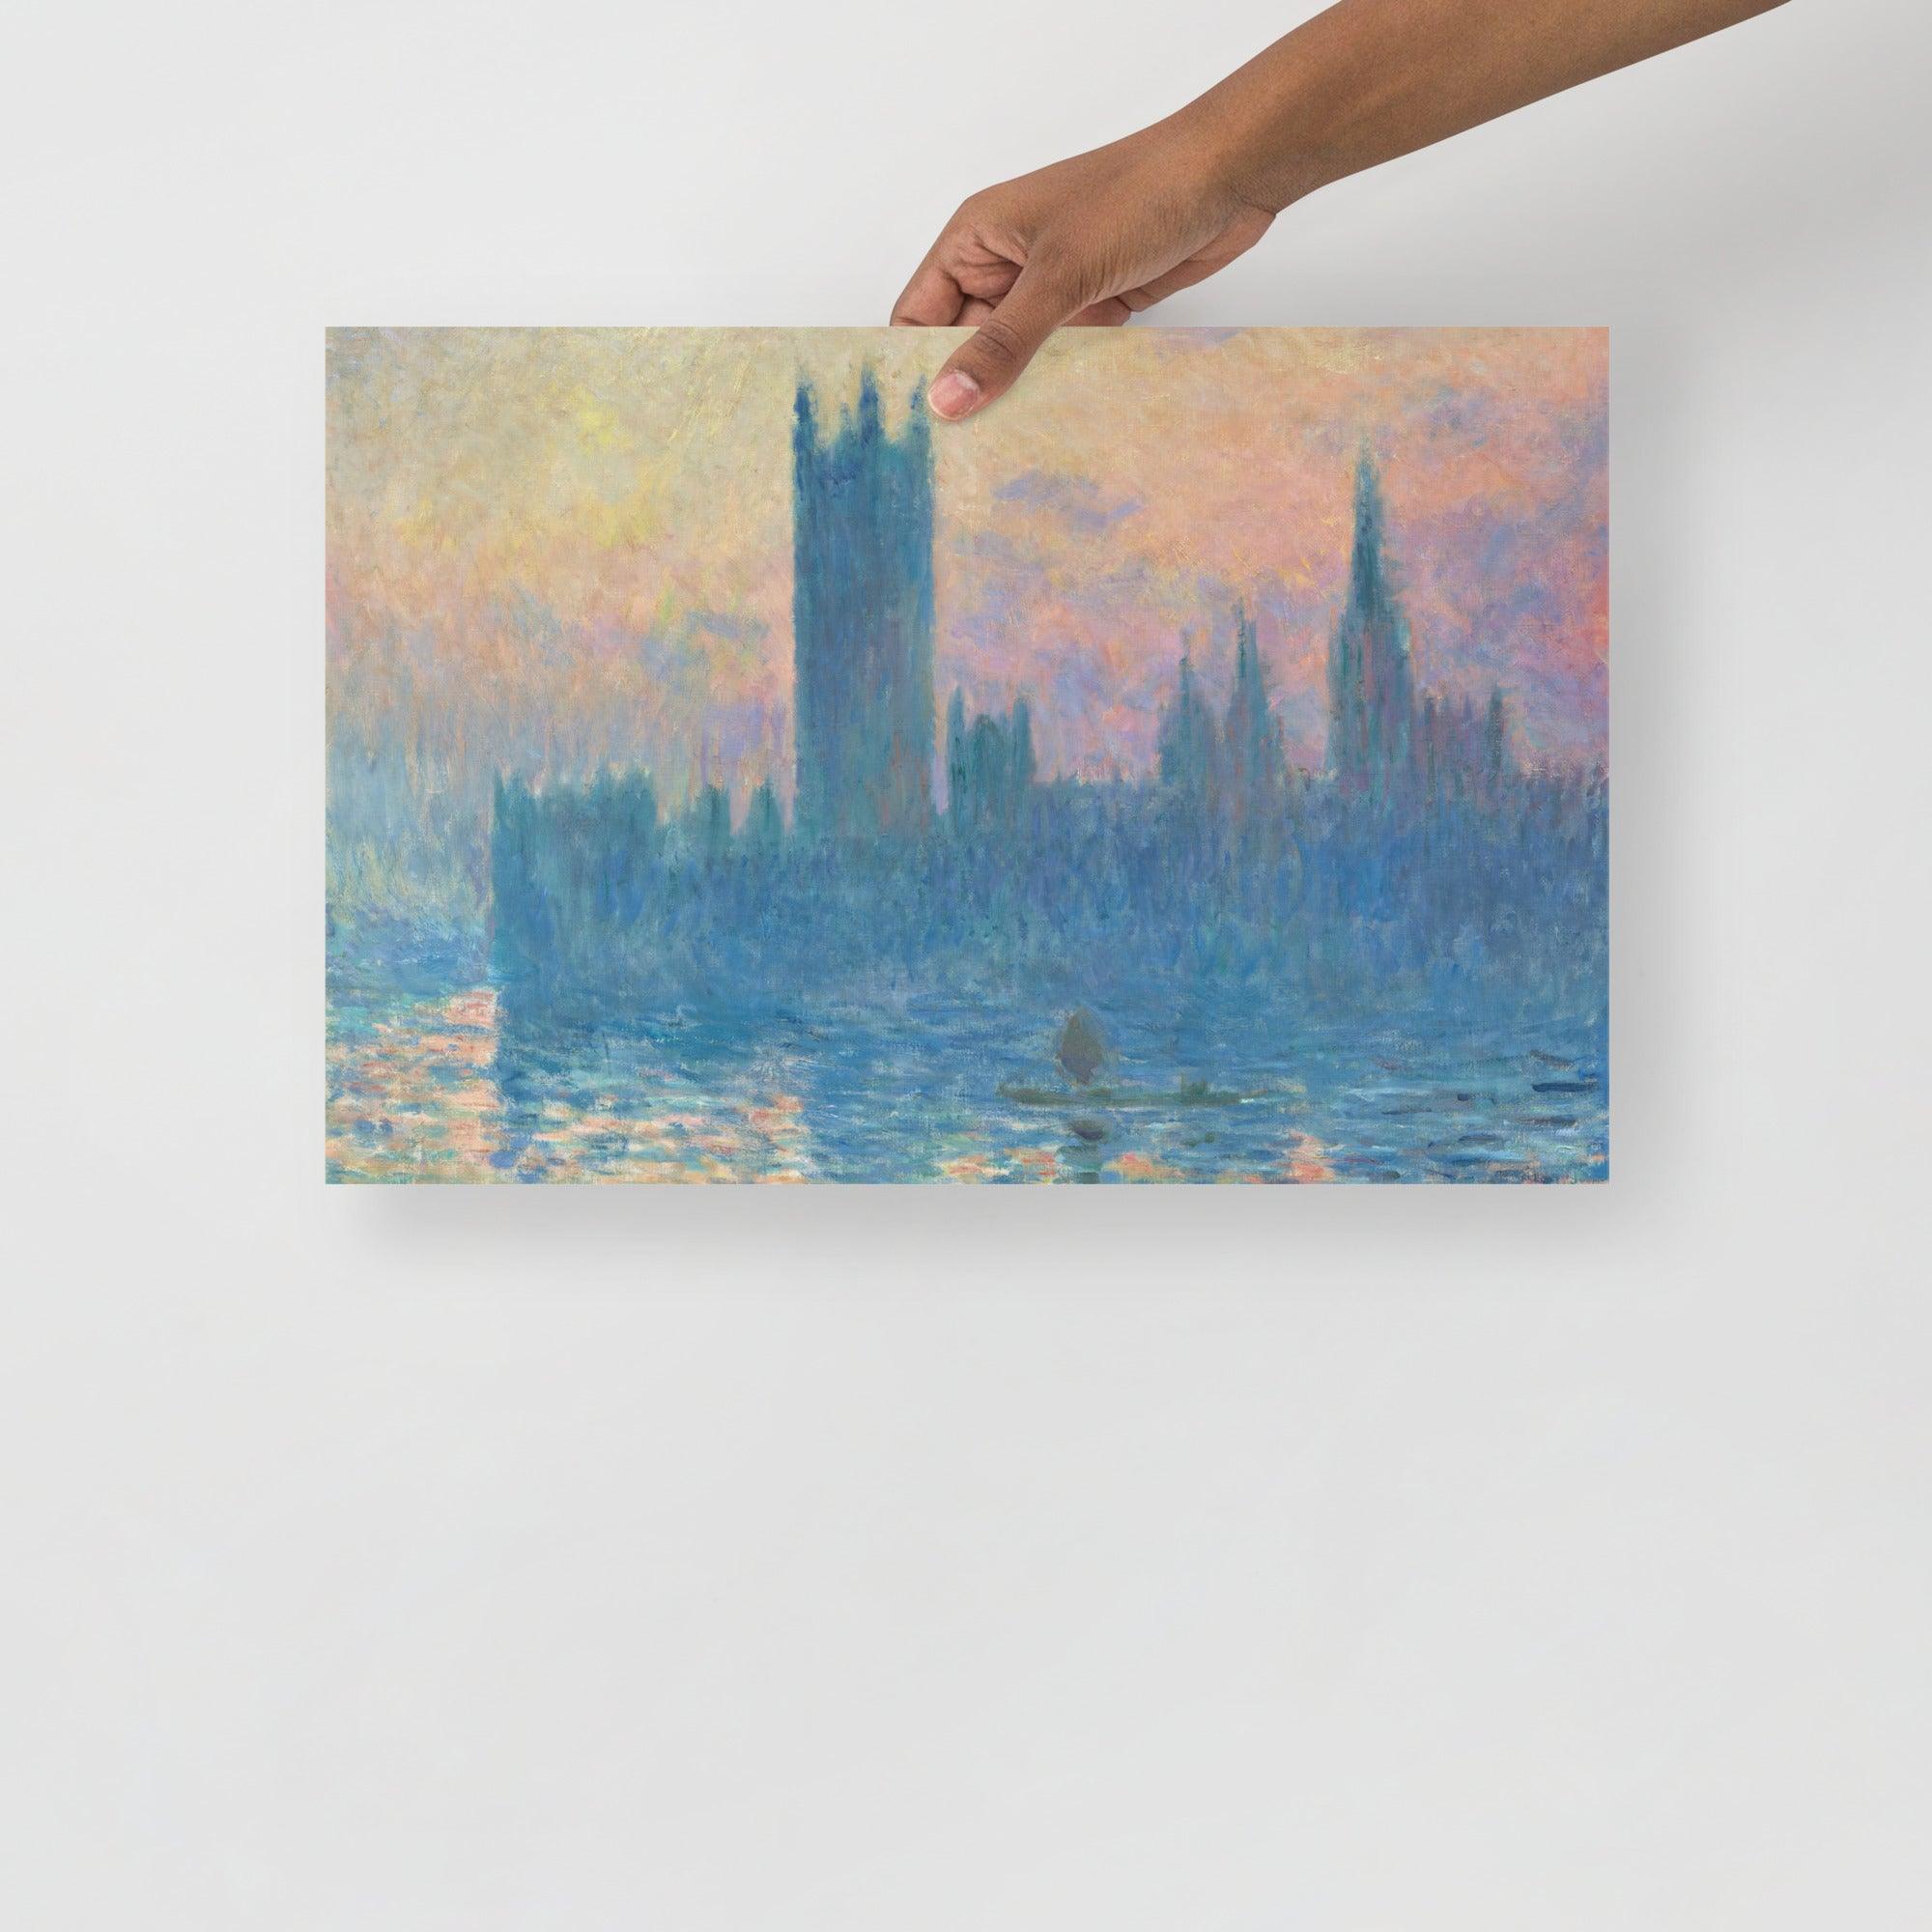 The Houses of Parliament, Sunset by Claude Monet poster on a plain backdrop in size 12x18”.